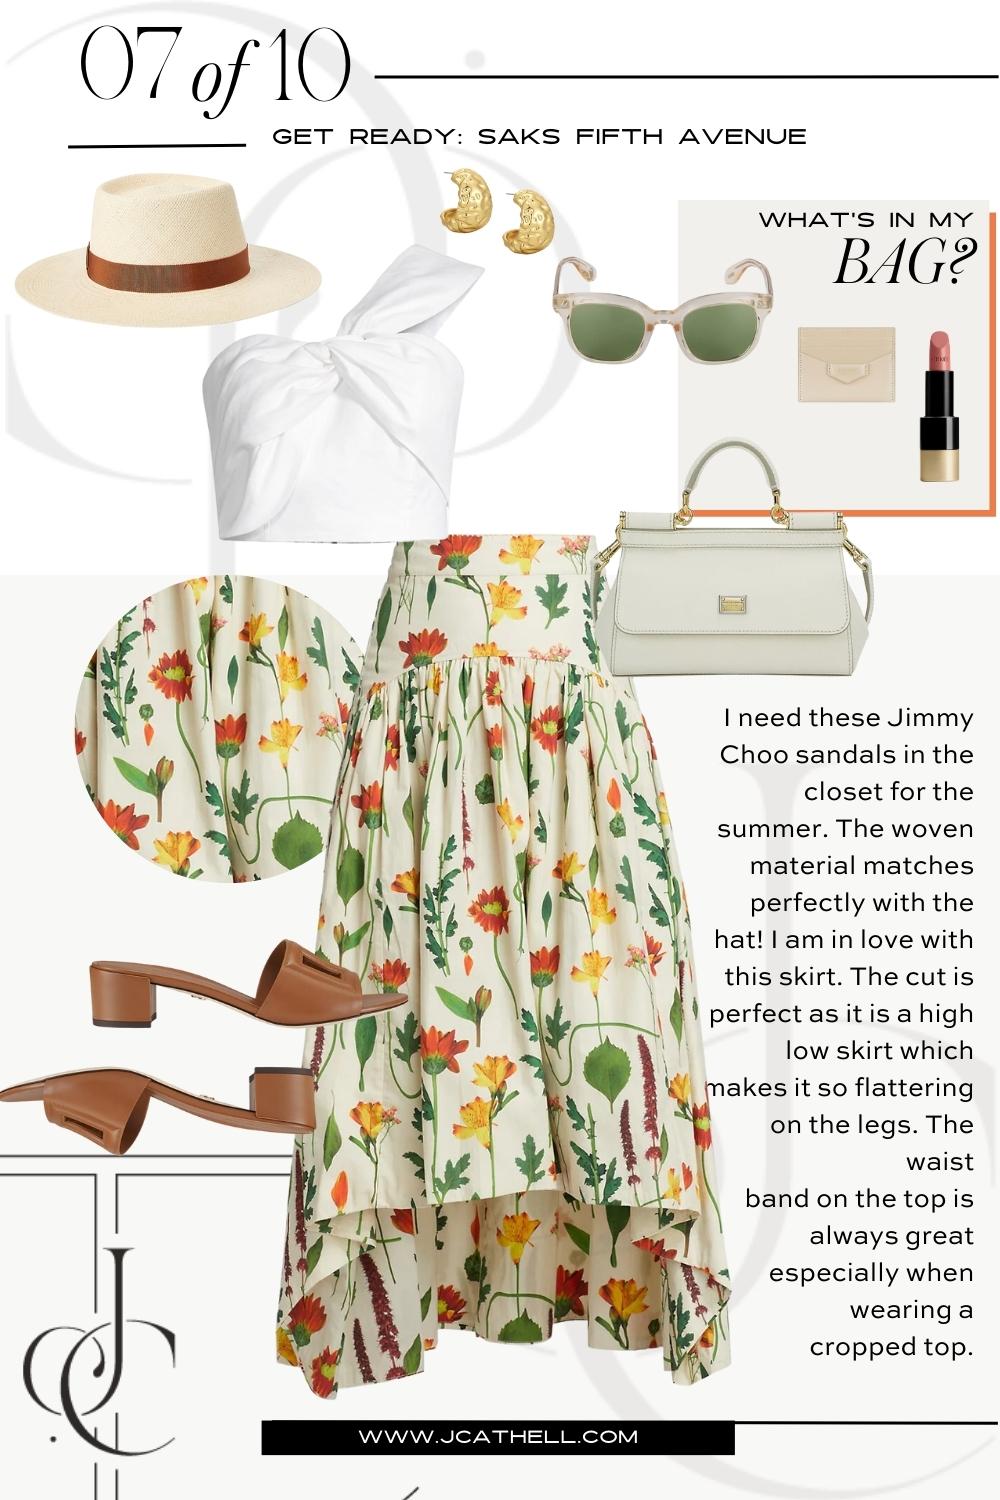 Summer Skirts with Saks Fifth Avenue - J. Cathell